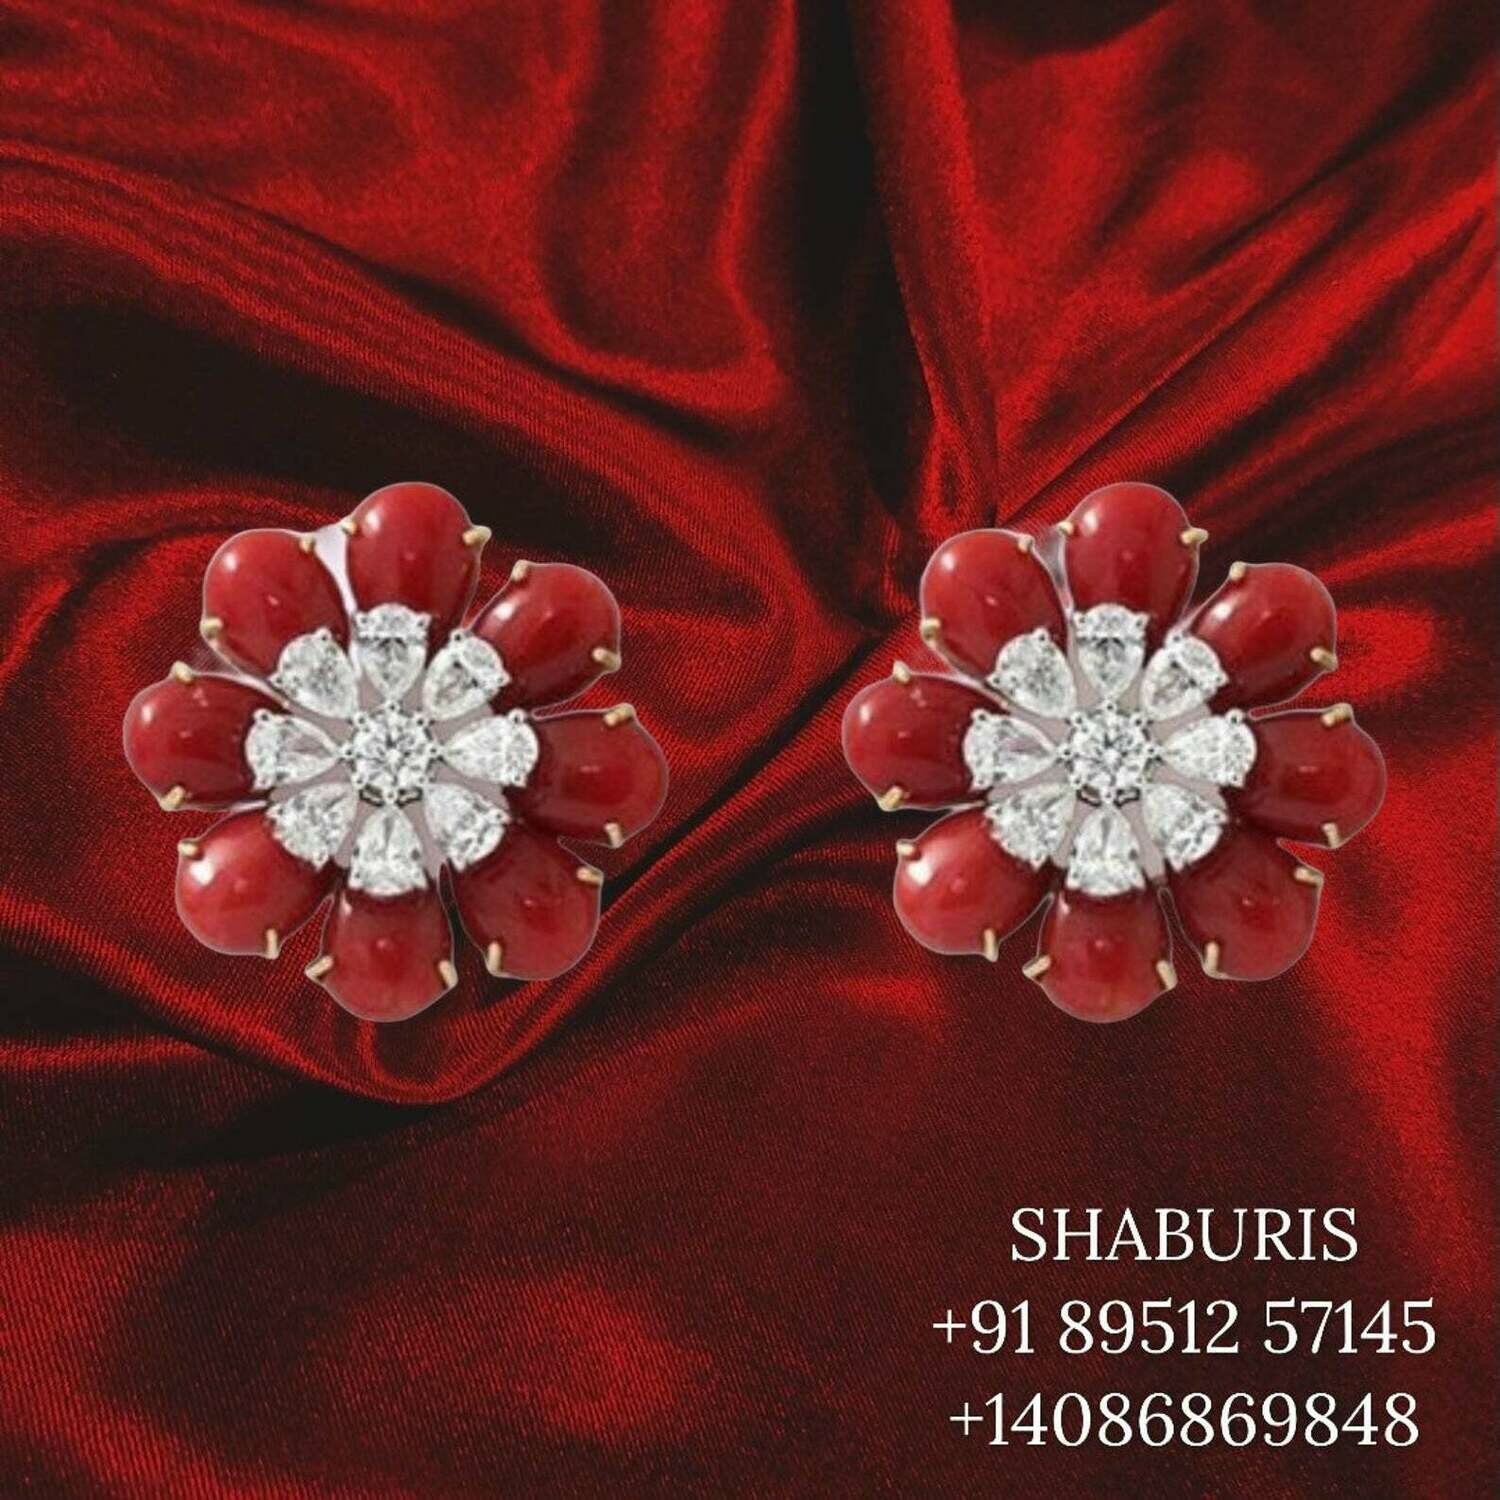 Latest Indian Jewelry,Pure Silver Jewellery Indian ,coral studs,coral earrings,Indian Bridal,Indian Wedding Jewelry-NIHIRA-SHABURIS